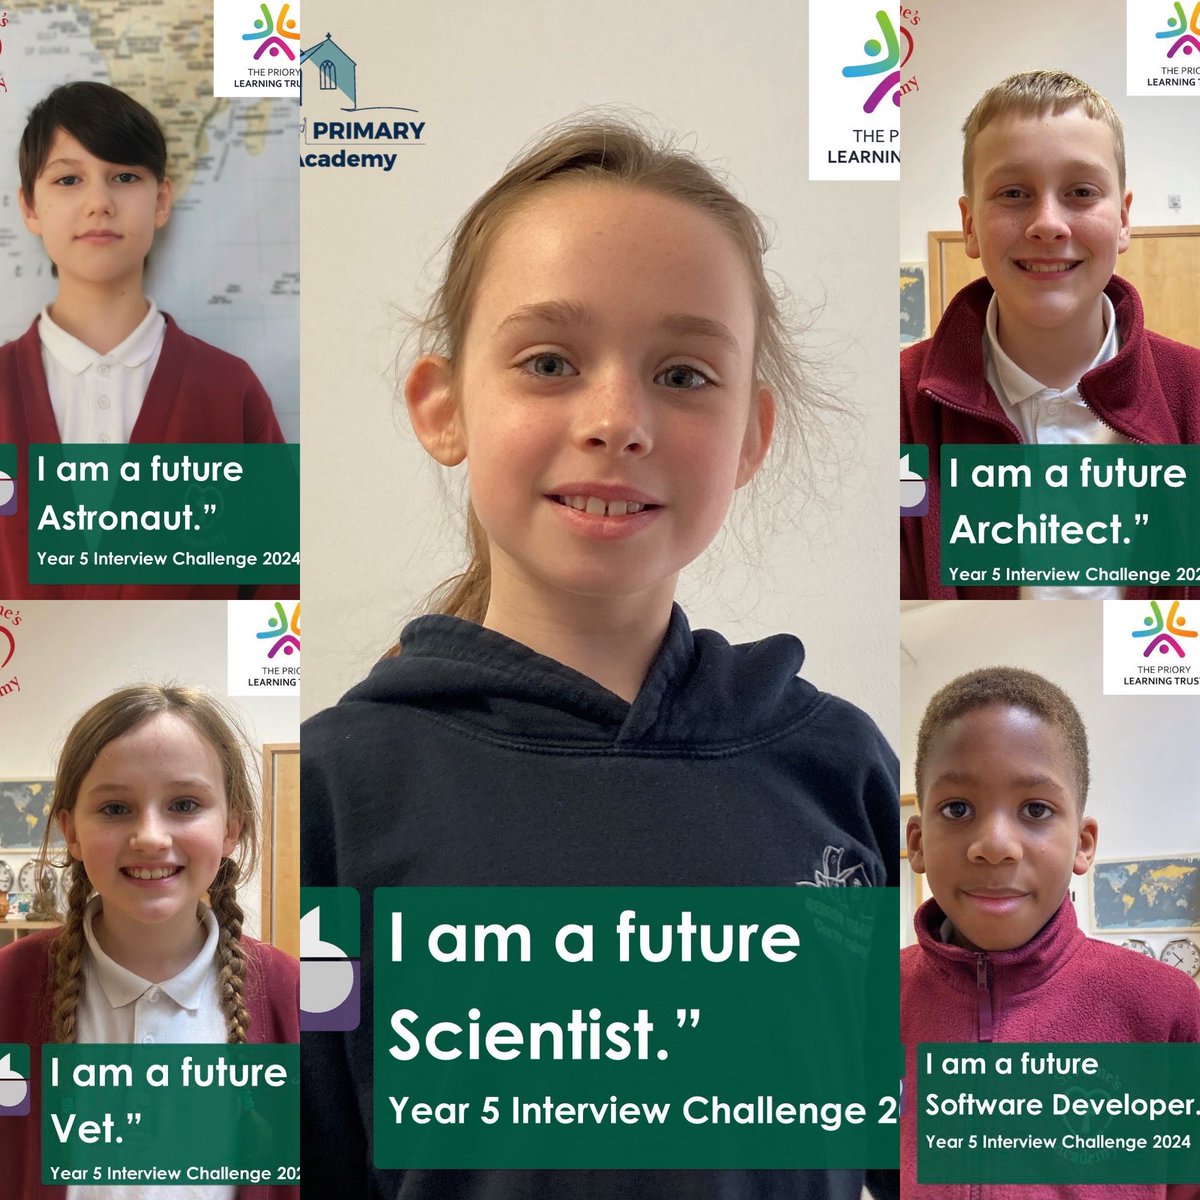 It's Science Week! The Priory Learning Trust Careers Team have been busy meeting our year 5 students to talk about their career hopes and dreams. It was great to see a passion for science and fearless STEM aspiration among our young people. #SmashingStereotypes @ScienceWeekUK